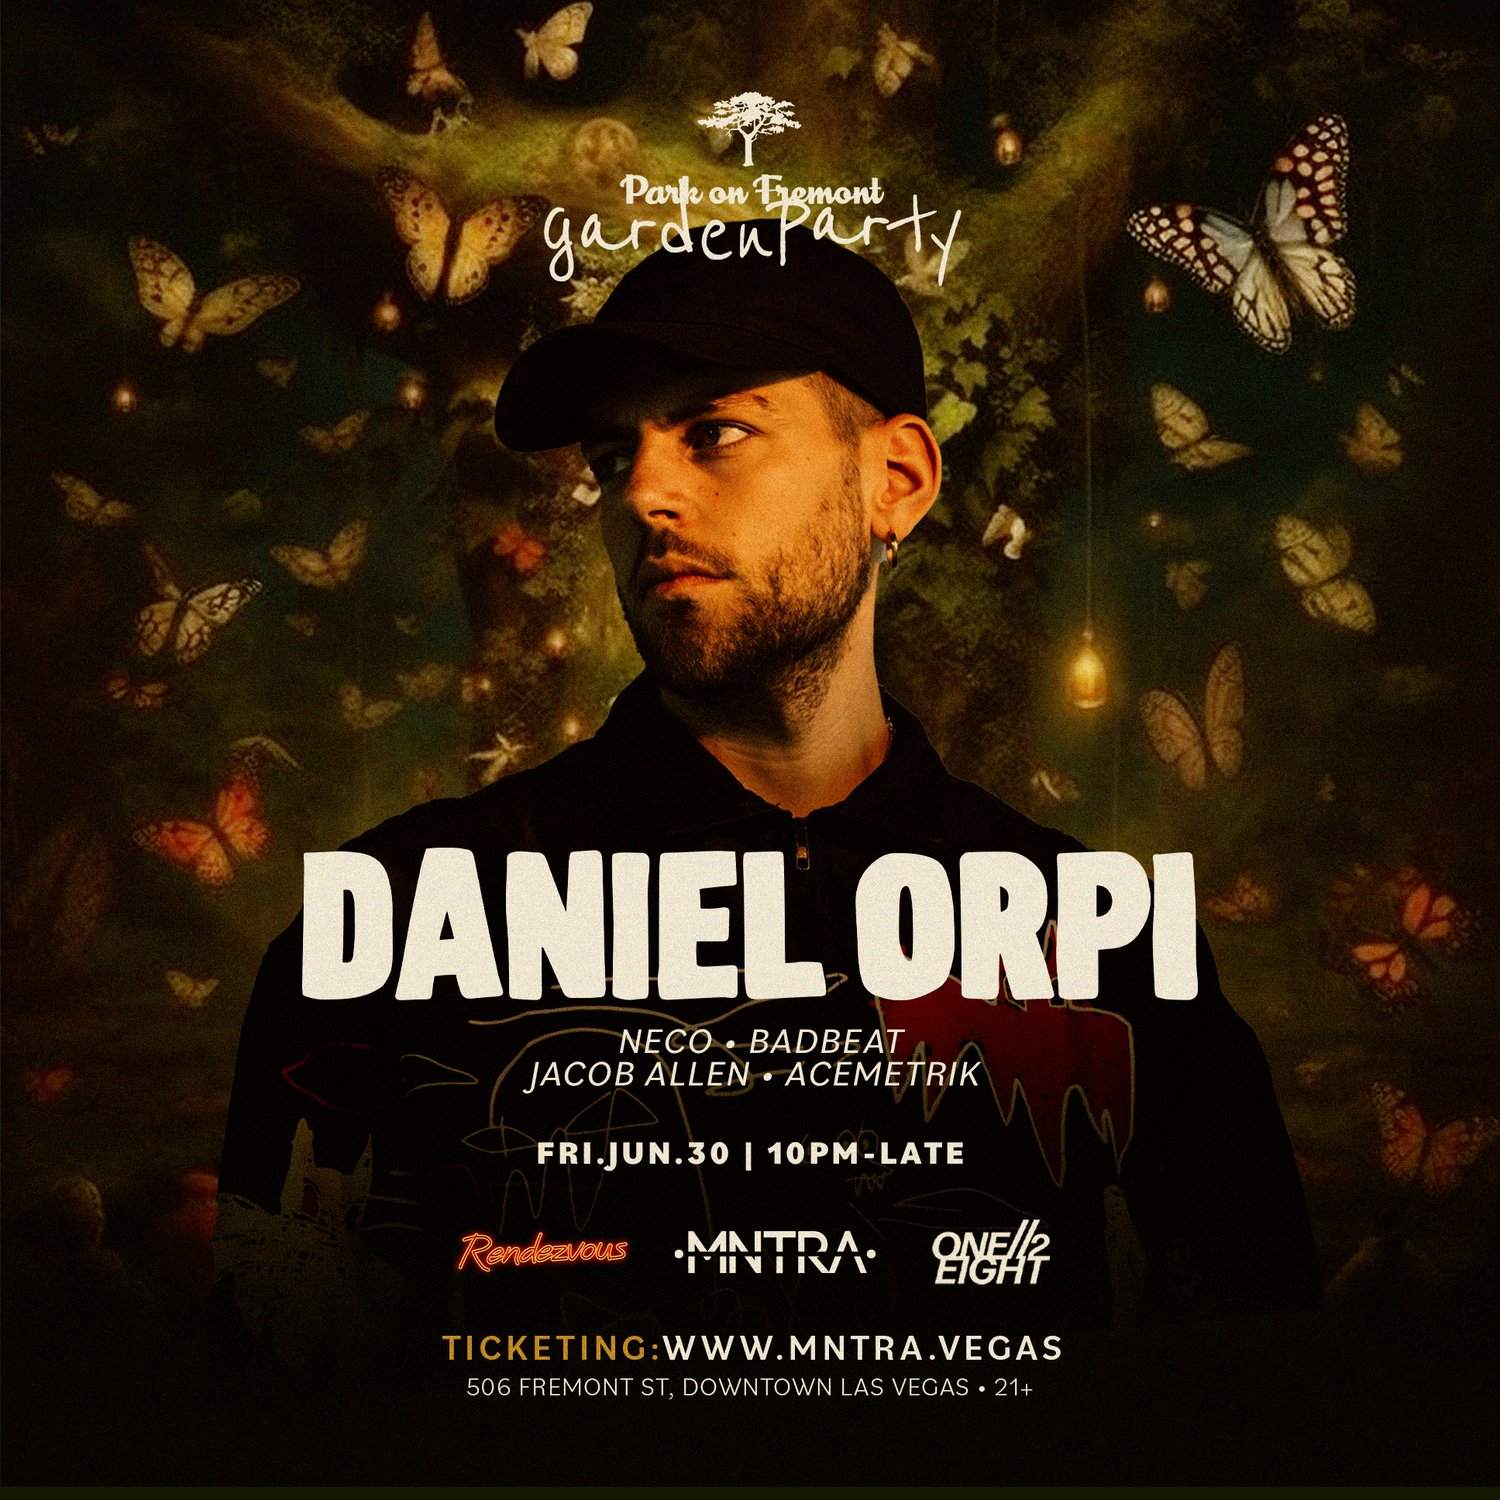 MNTRA presents Garden Party with Daniel Orpi - フライヤー表